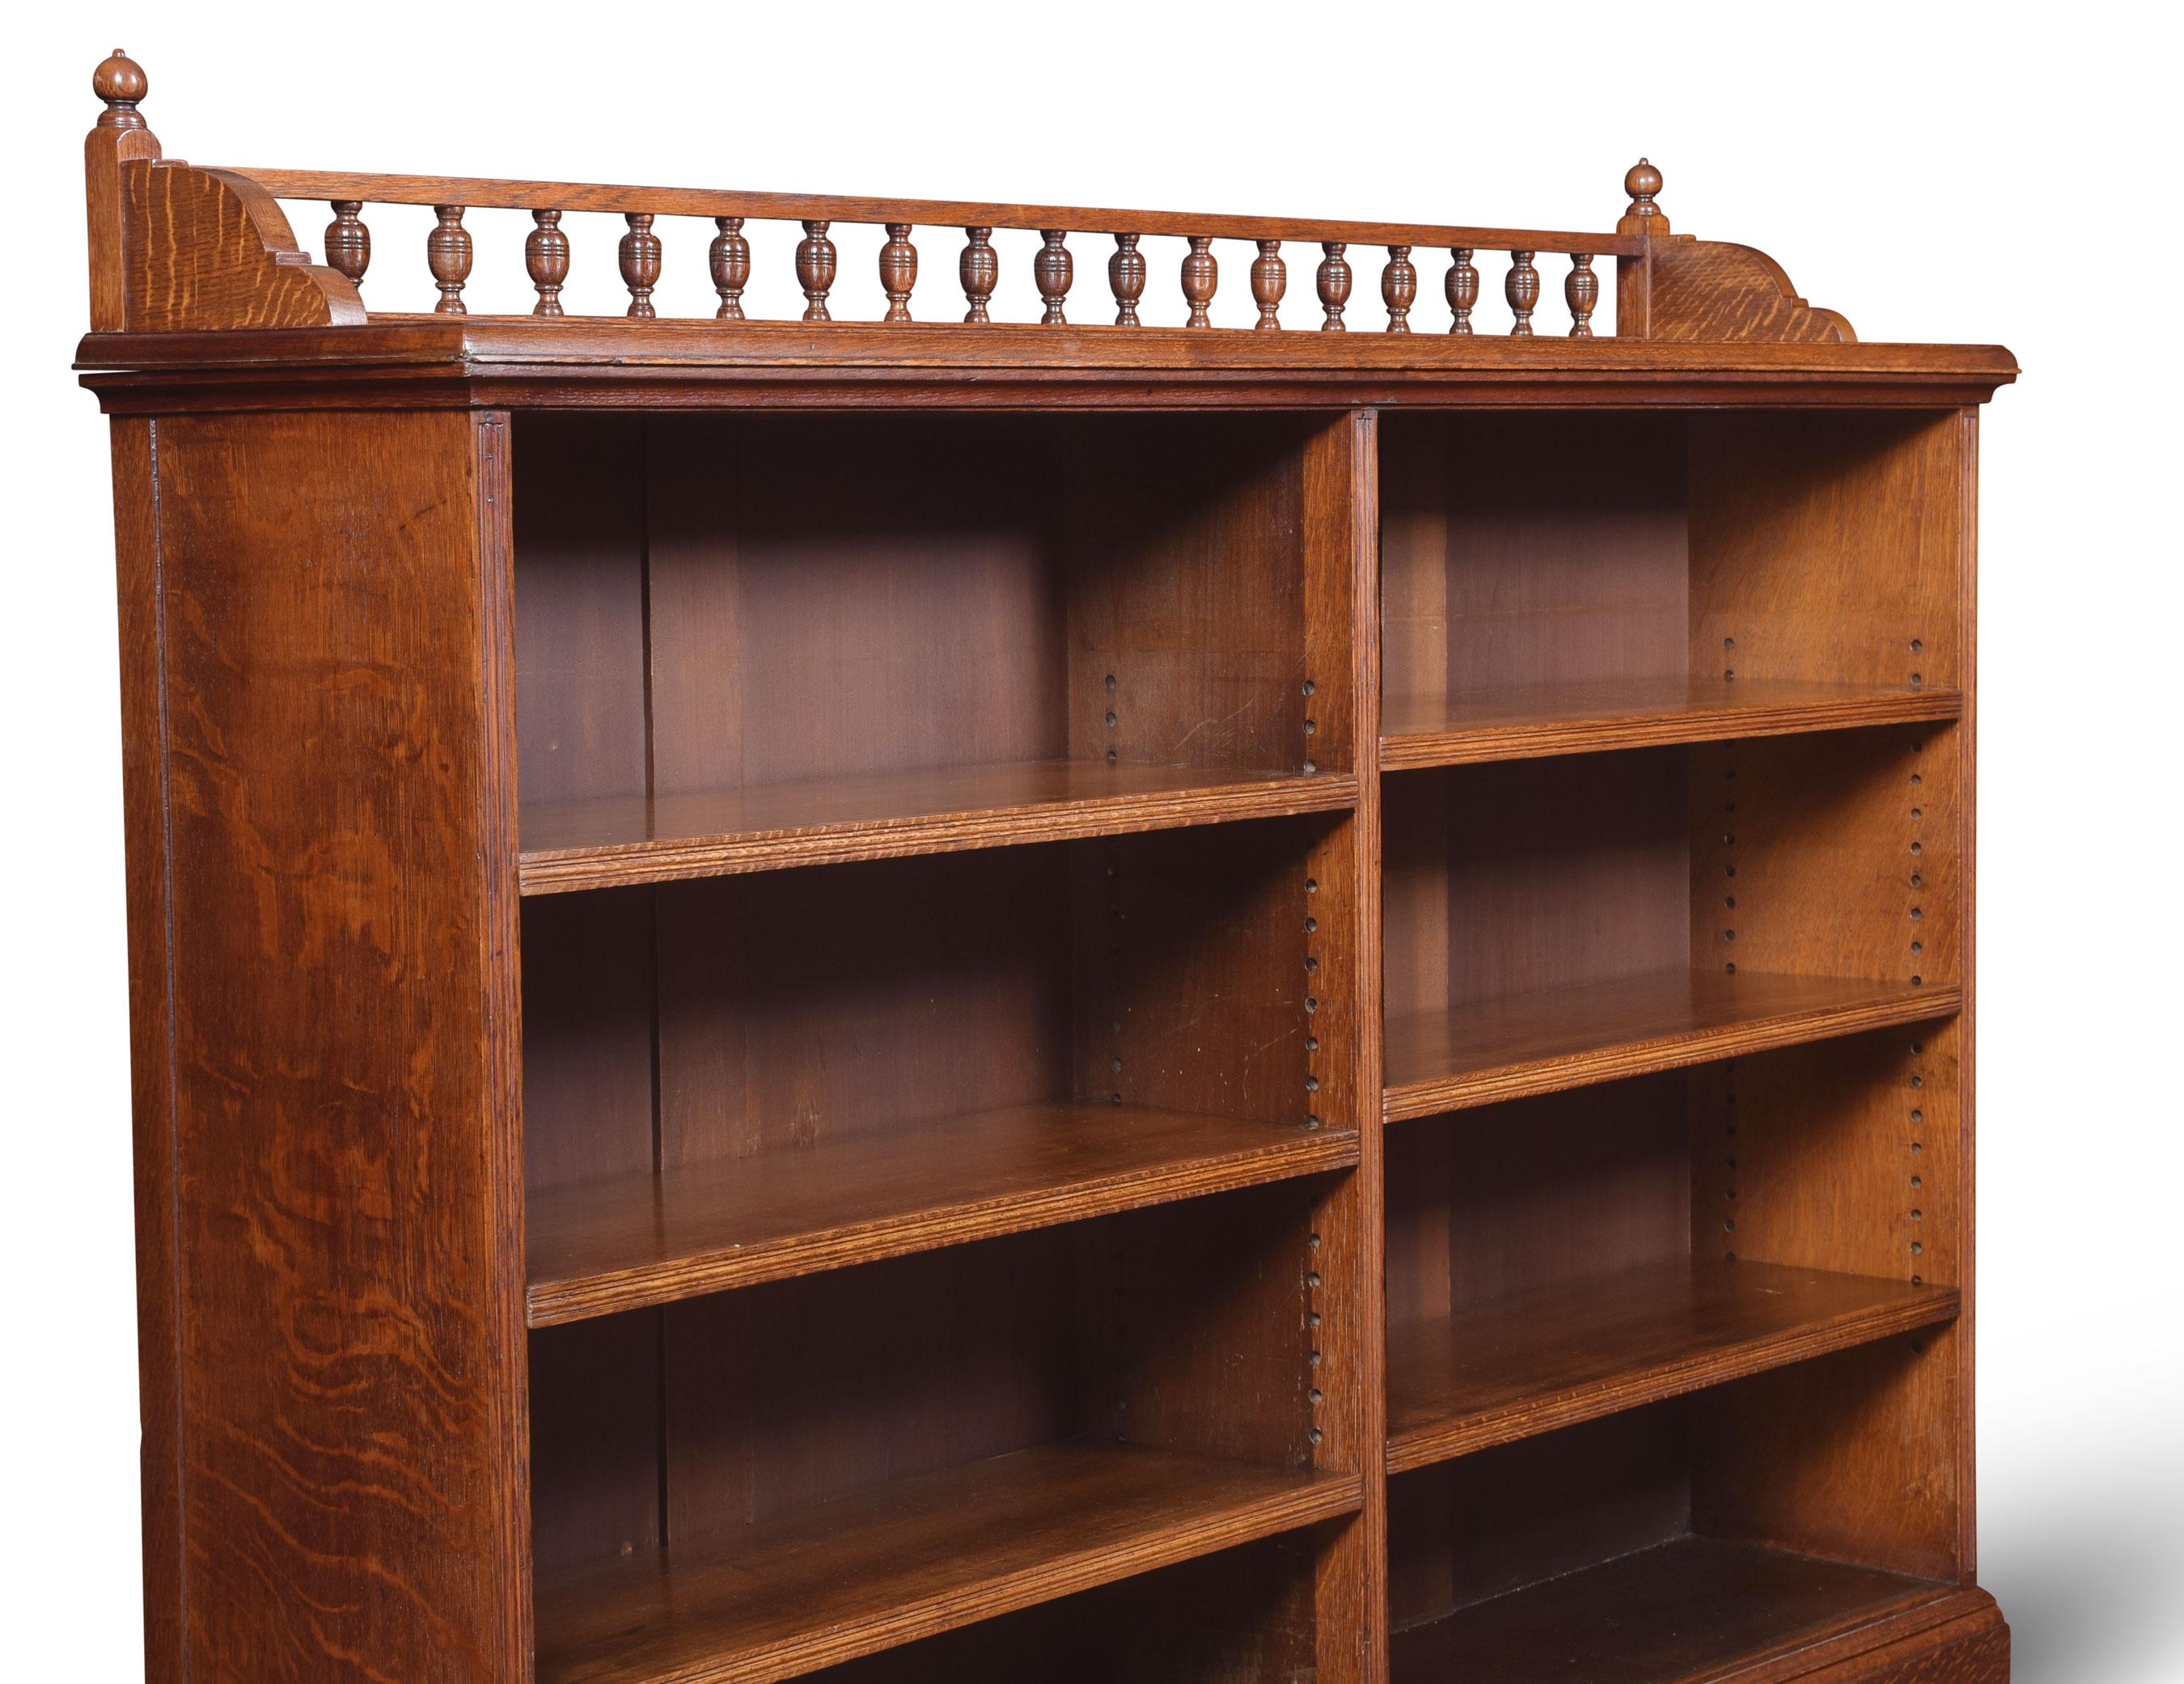 Oak open bookcases, the raised gallery above rectangular moulded top thee bookcase fitted with two separate bays of shelving having three adjustable shelves in each section raised up on plinth base.
Dimensions:
Height 49.5 inches
Width 60